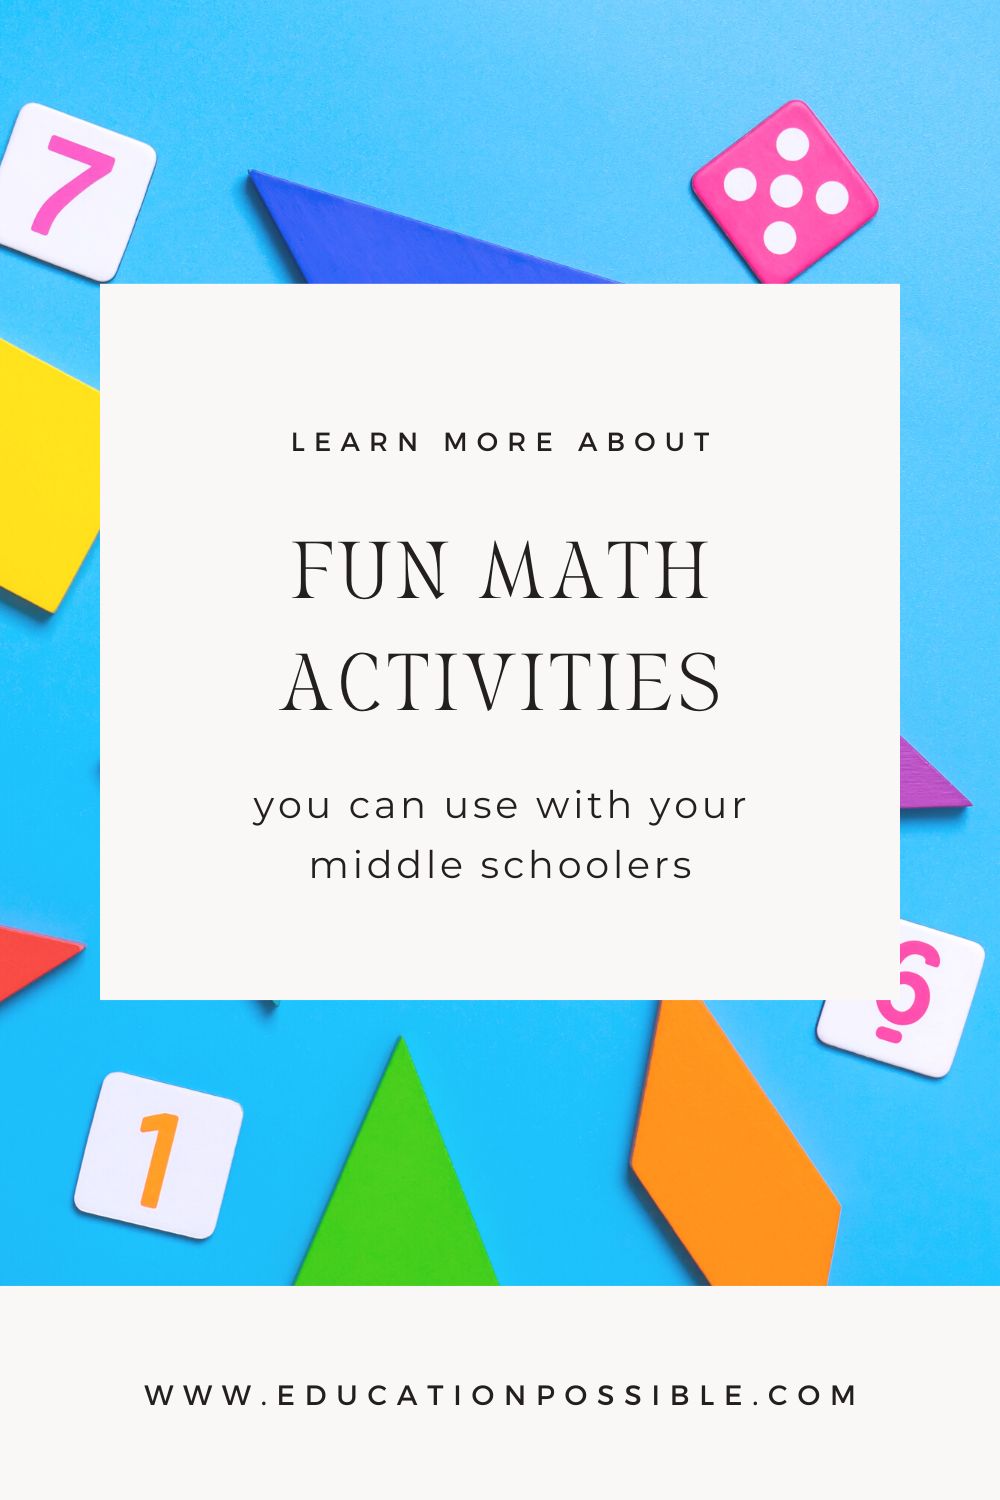 Fun Math Activities for Middle School